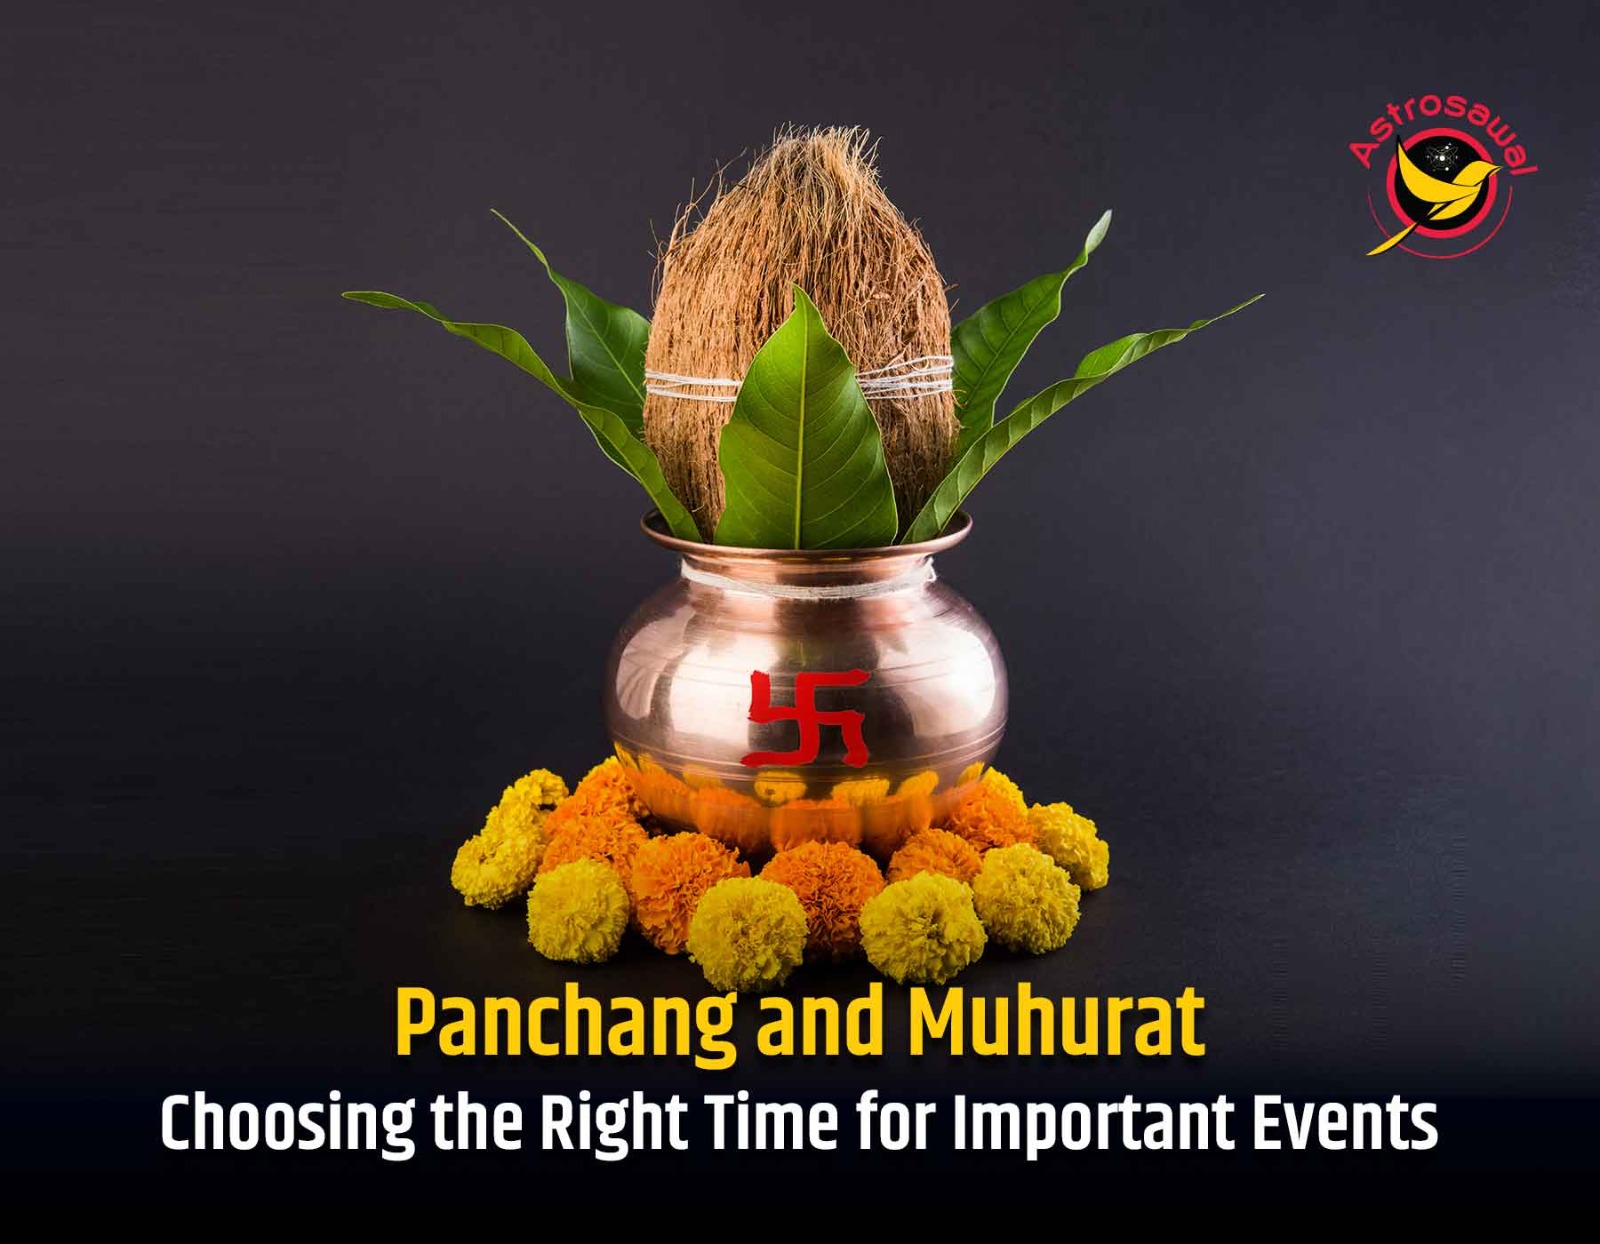 Panchang and Muhurta: The Secret Science of Choosing the Right Time